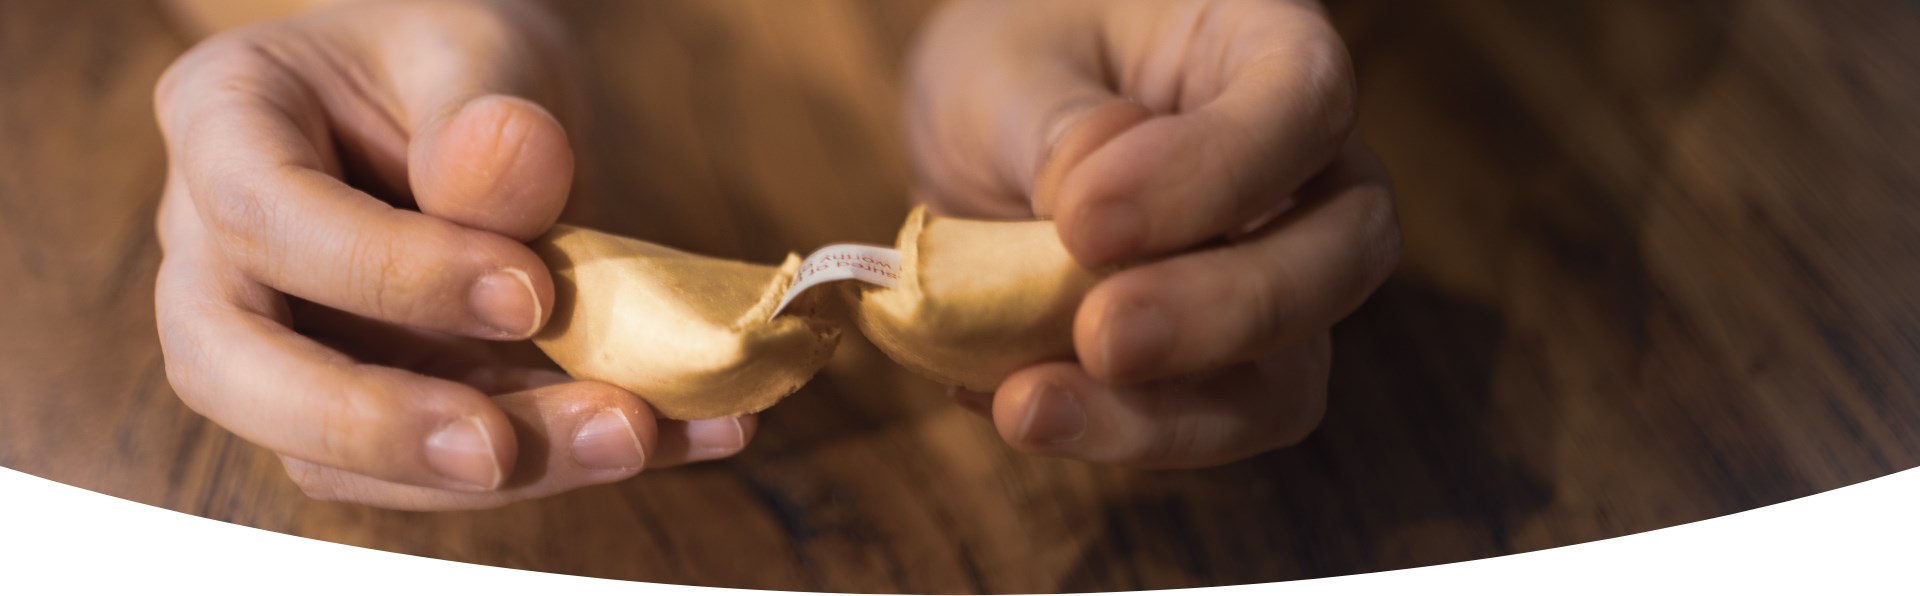 A man opens a fortune cookie. Only his hands and the fortune cookie can be seen.